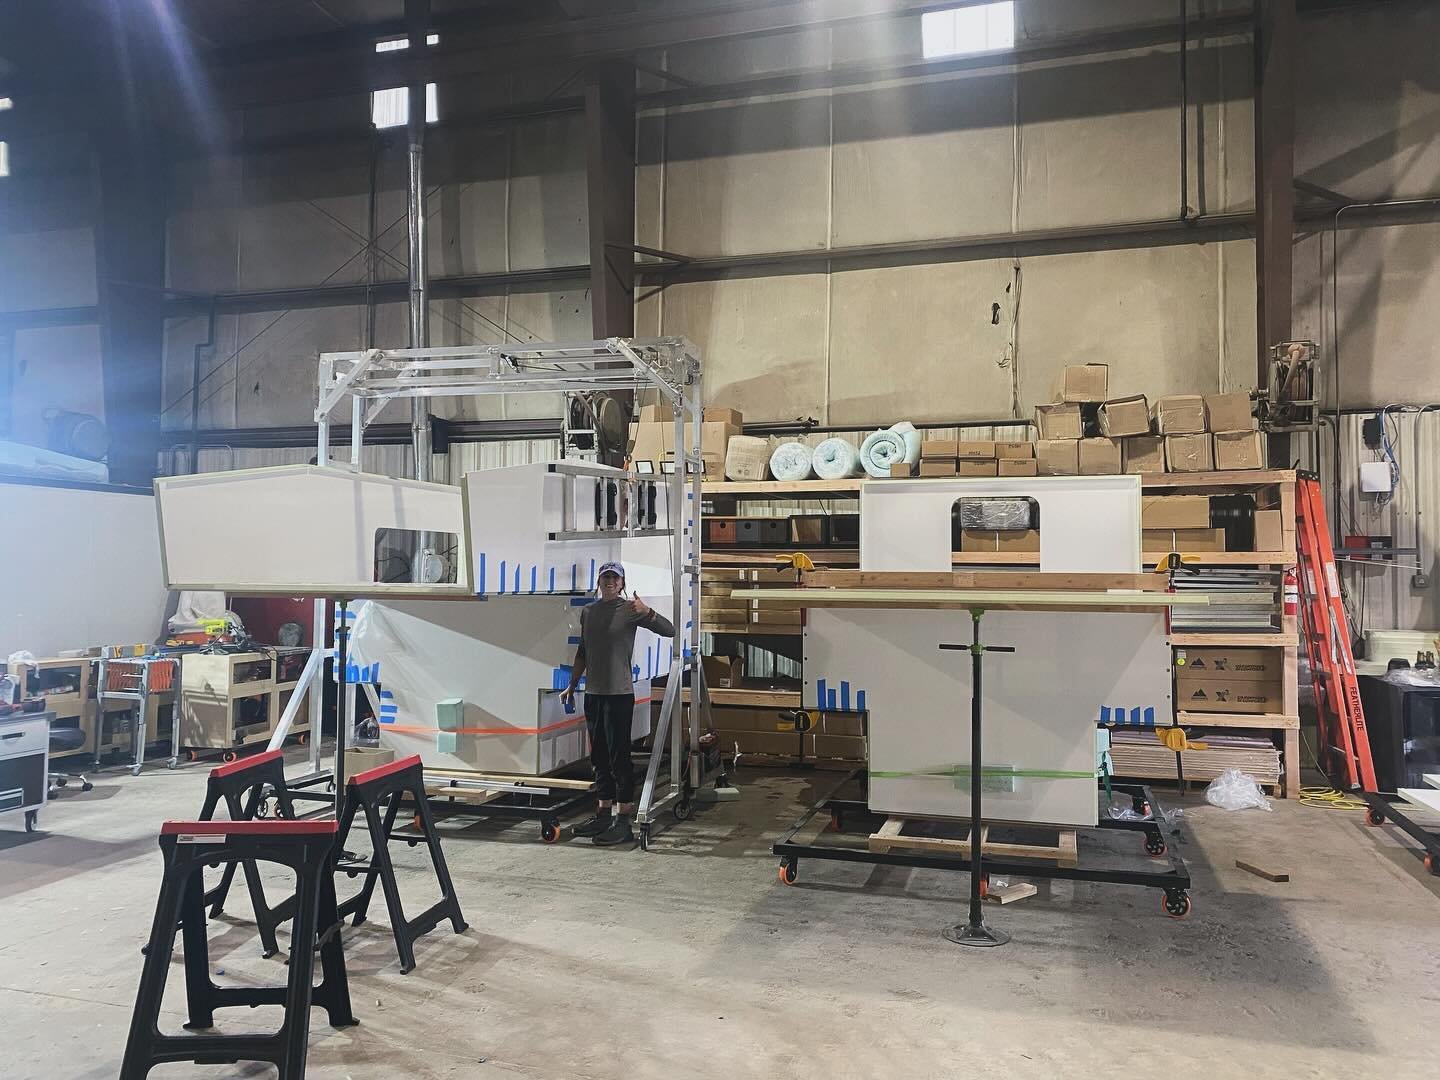 So excited to see the progress for our first batch of dealer campers at @labyrinthoverland in Grand Junction, Co! They&rsquo;re cranking these out quick! Can&rsquo;t wait to see the high quality buildouts Lee has been working on!